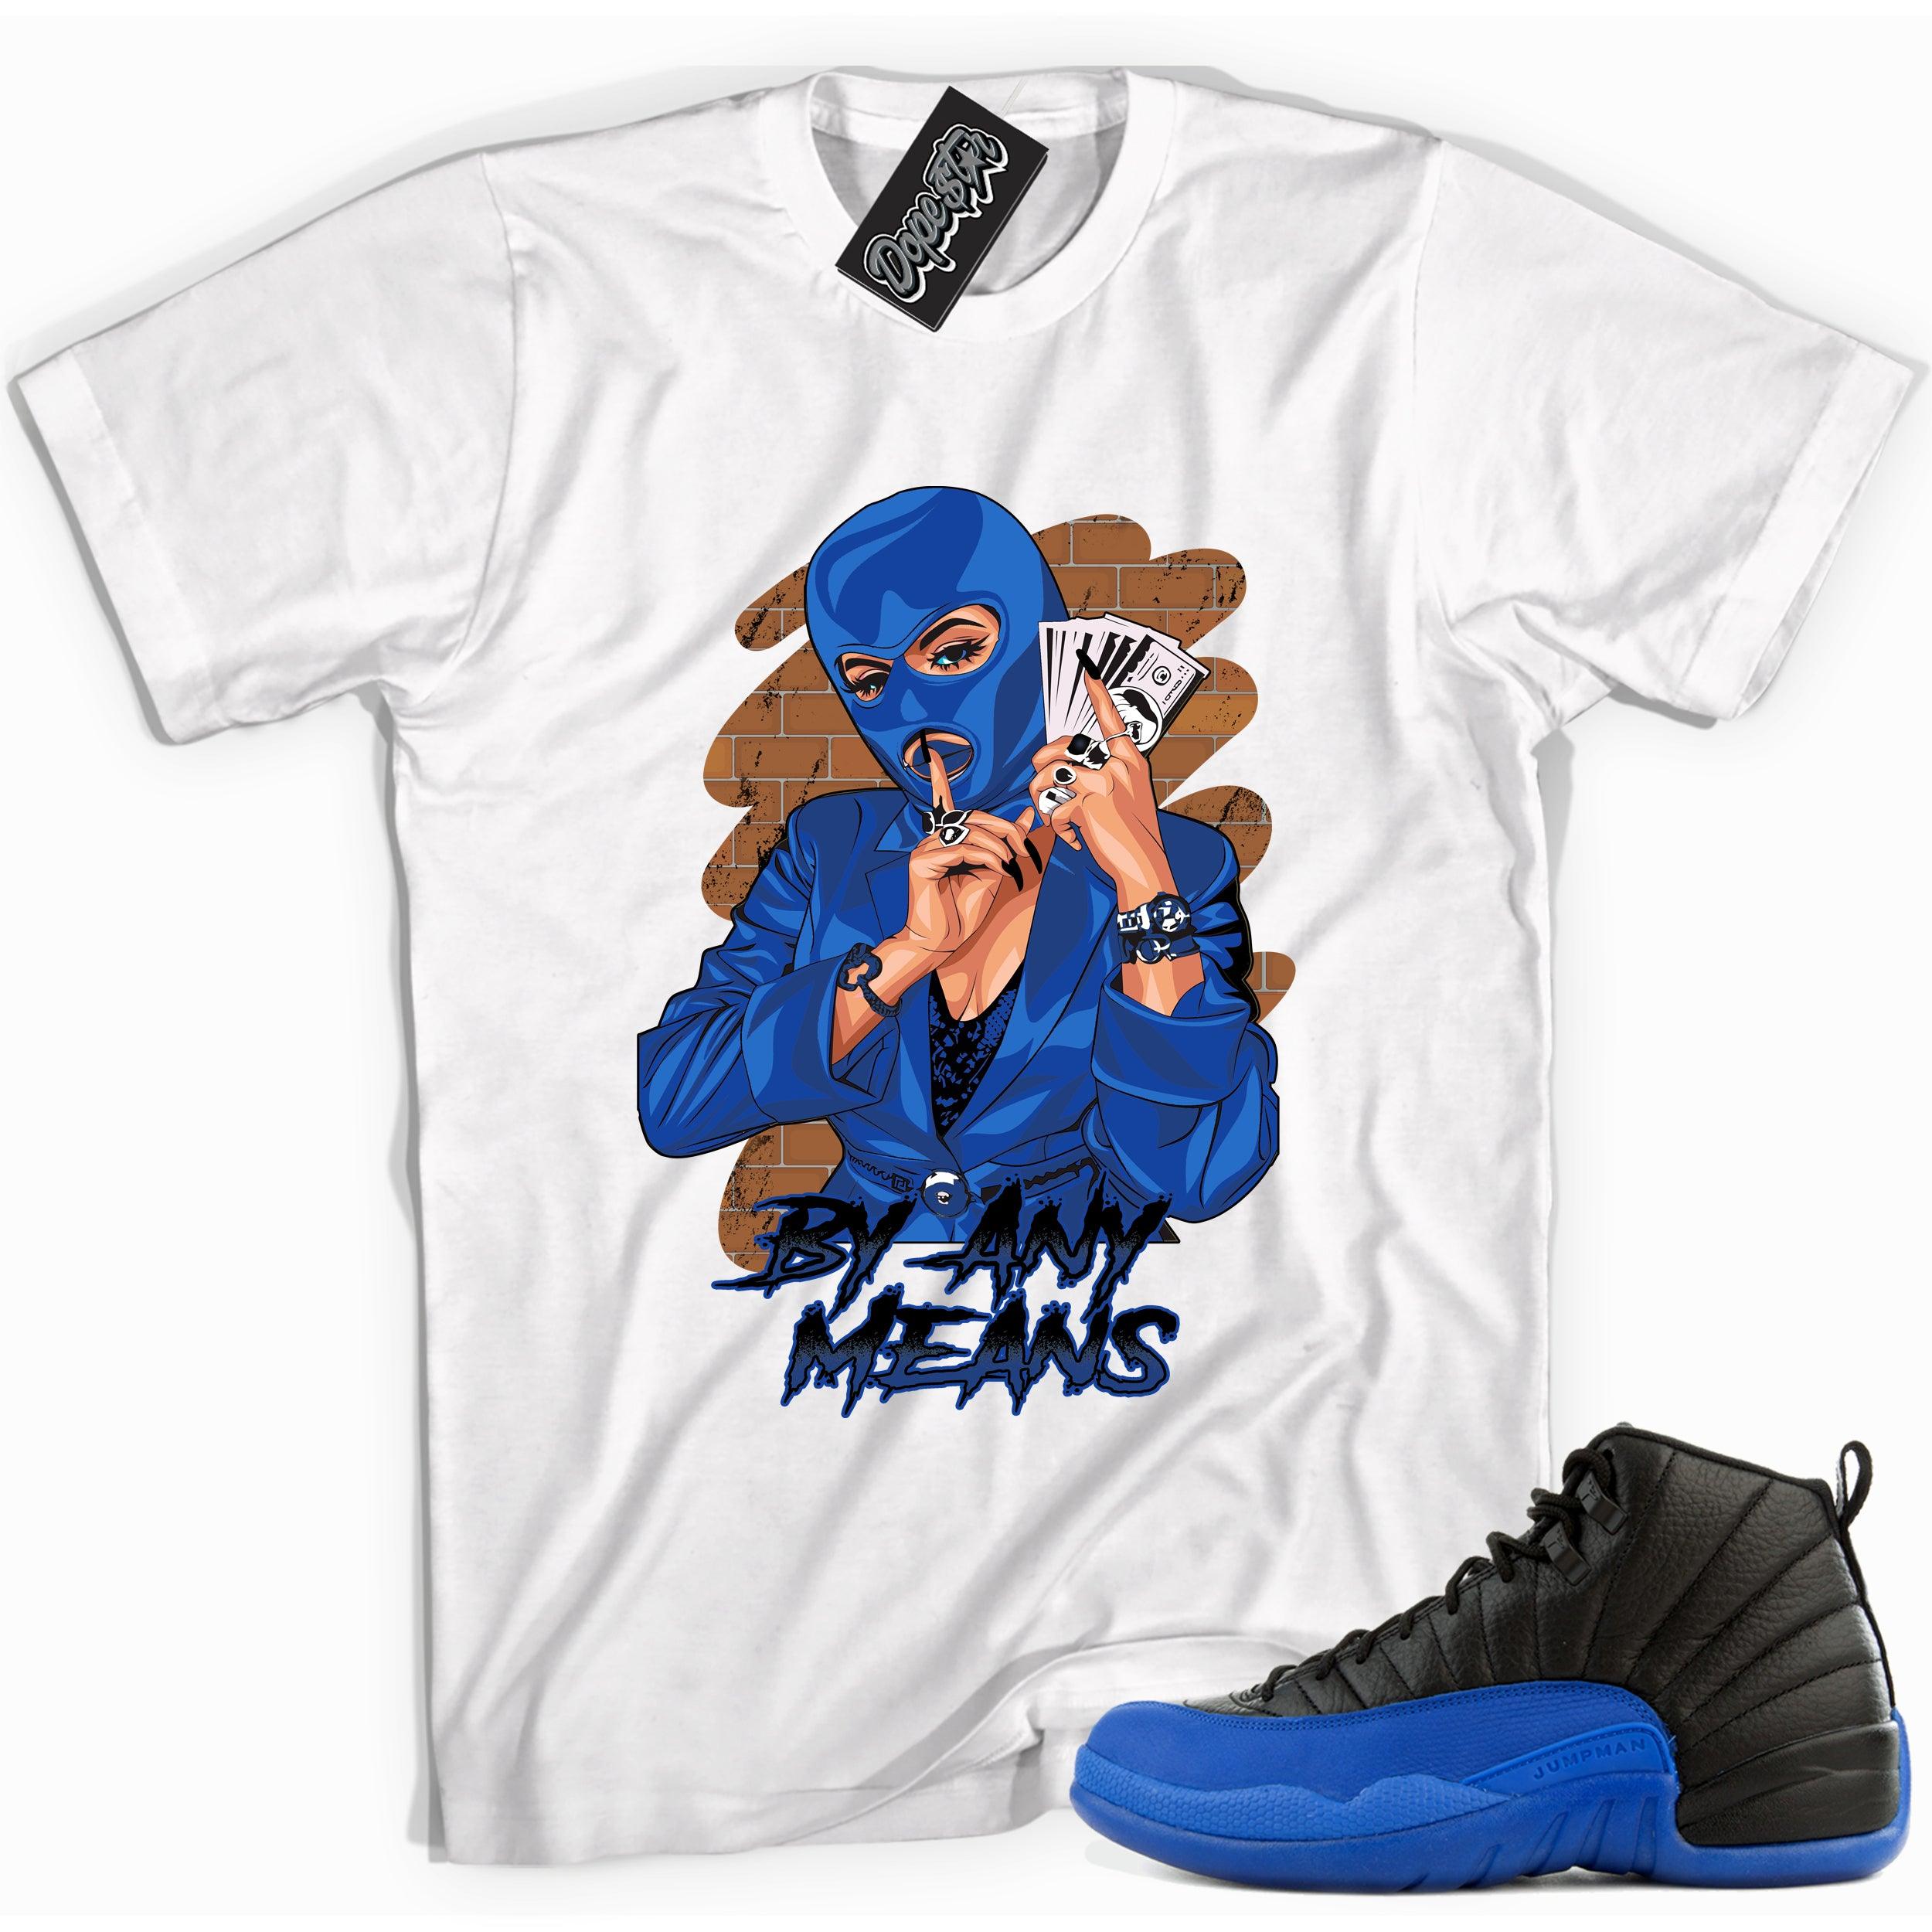 Cool white graphic tee with 'by any means' print, that perfectly matches Air Jordan 12 Retro Black Game Royal sneakers.